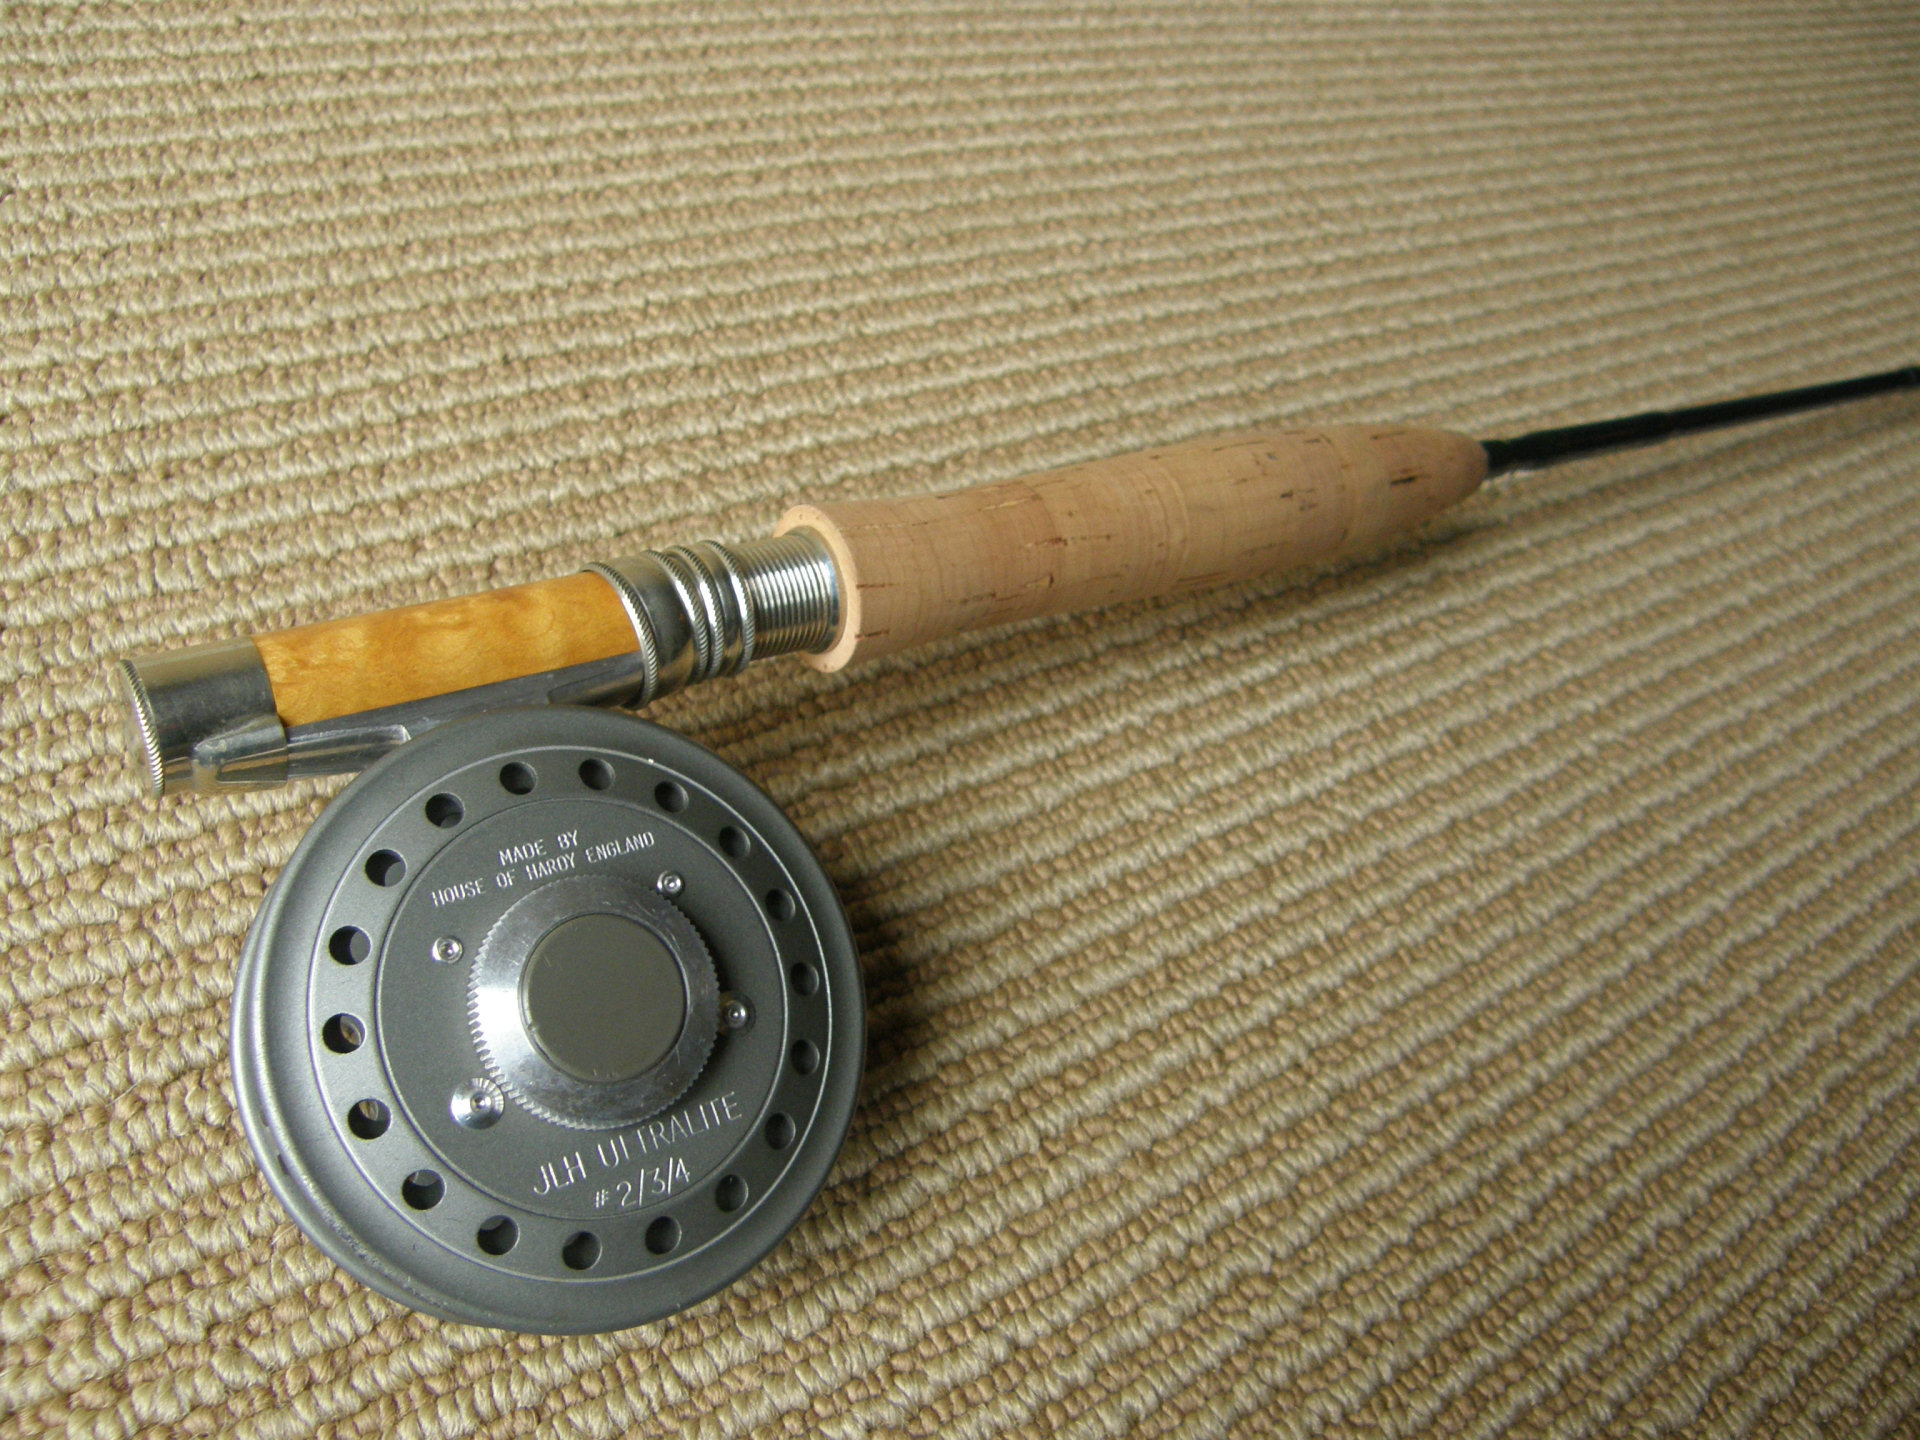 winston fly rod serial numbers